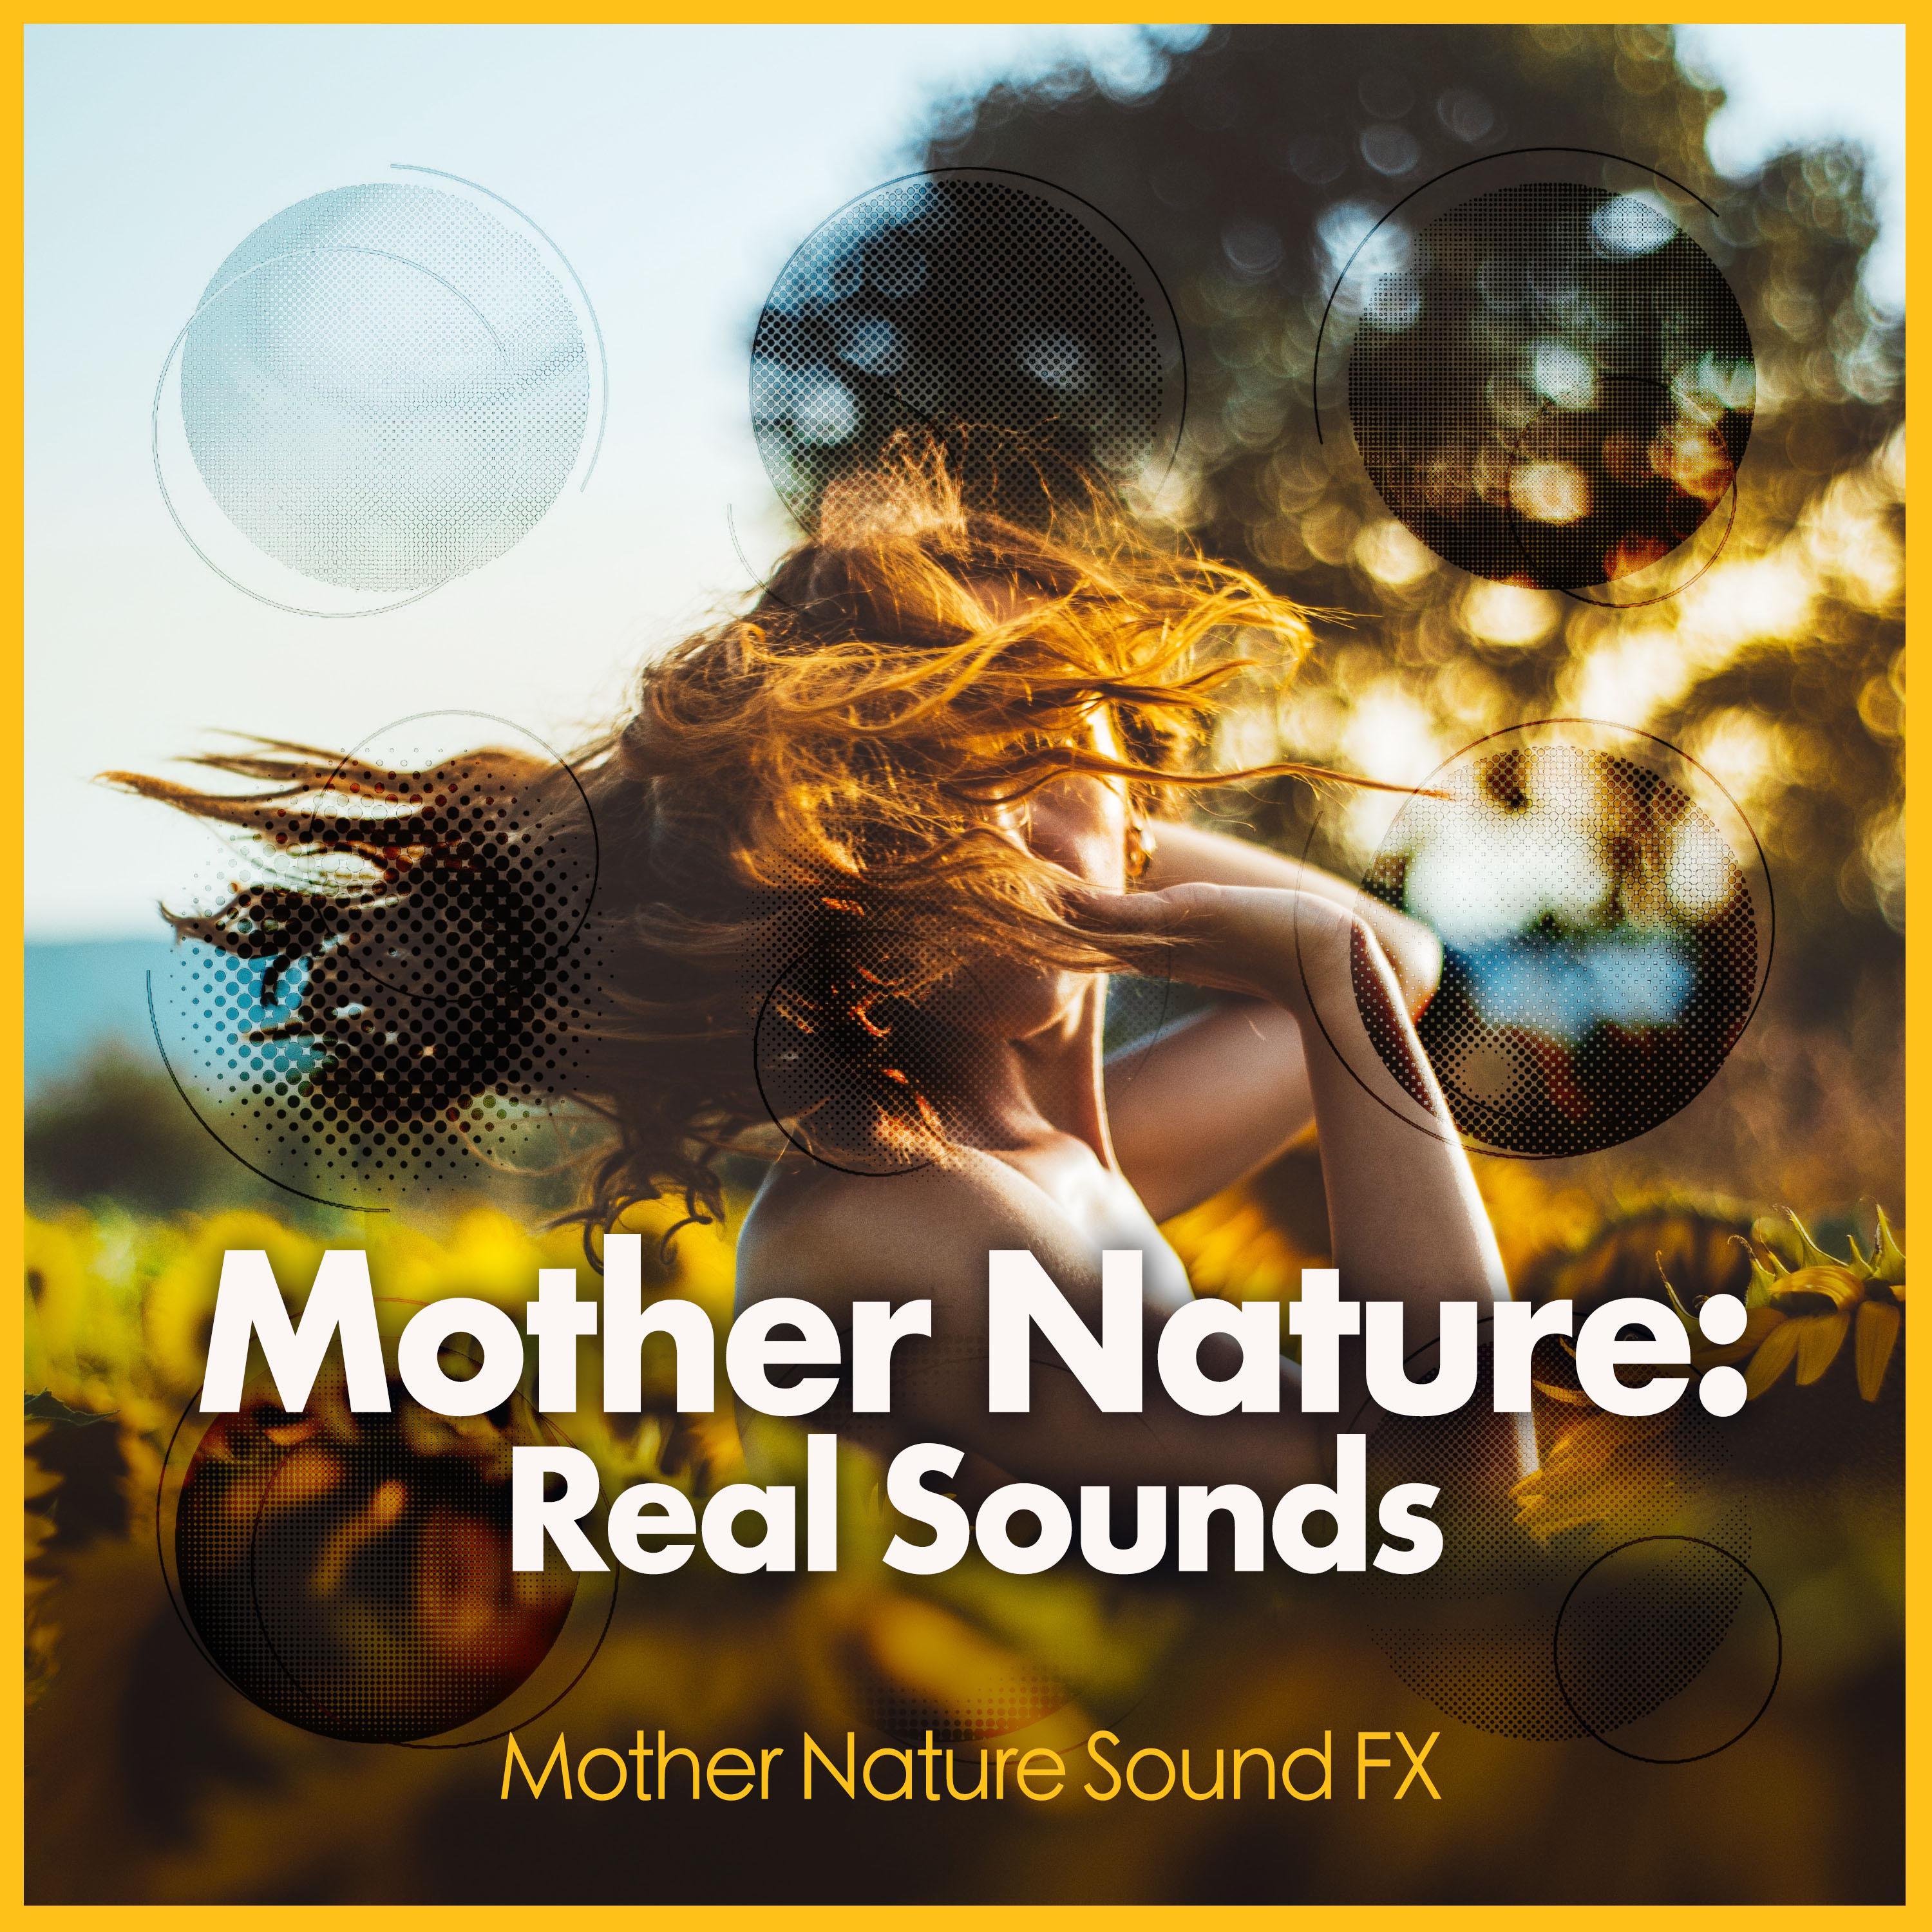 Mother Nature: Real Sounds